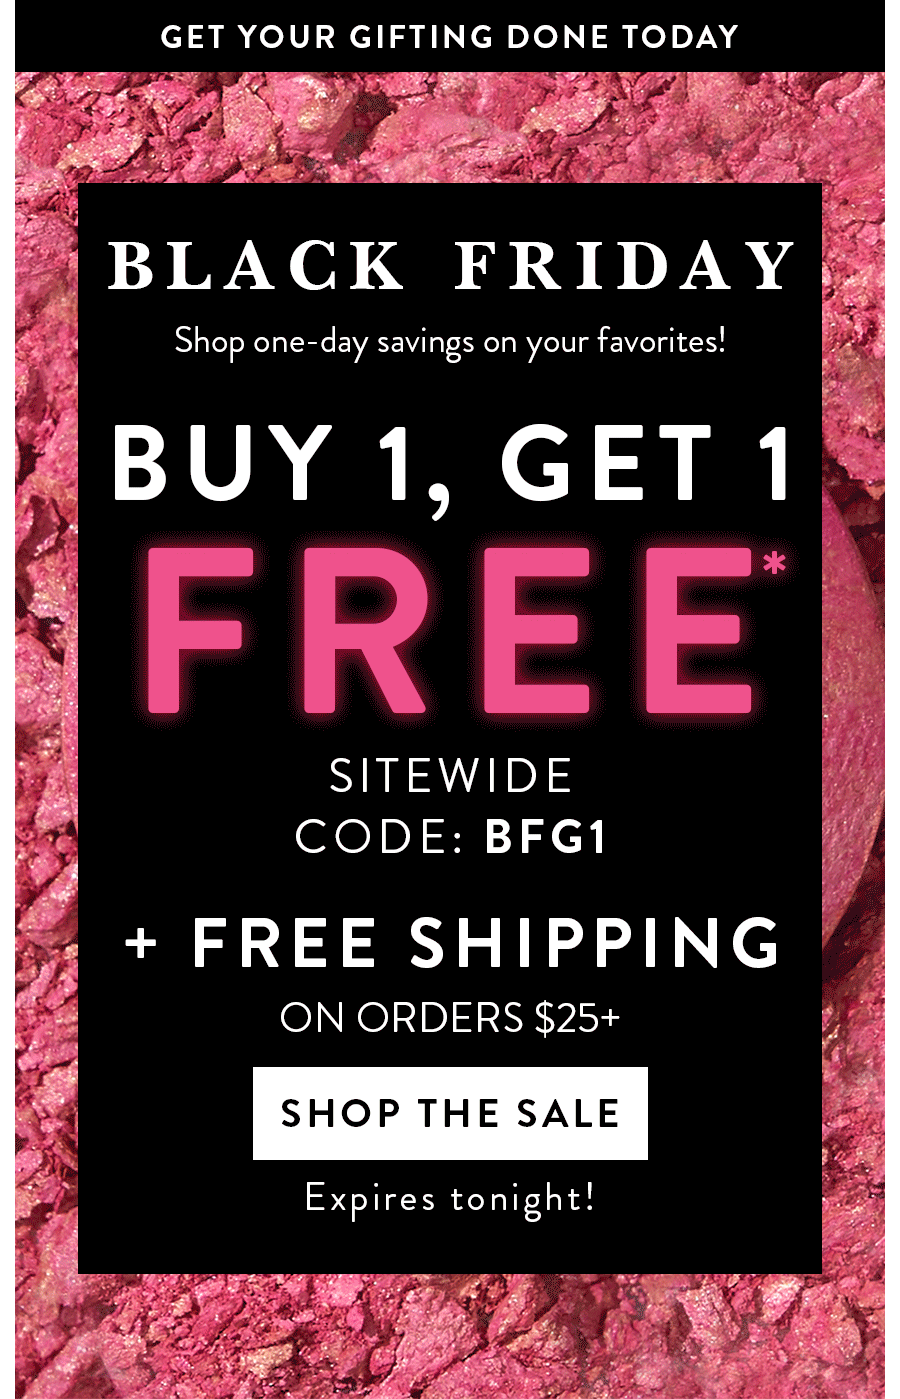 BUY 1, GET 1 FREE* SITEWIDE + FREE SHIPPING ON ORDERS $25+